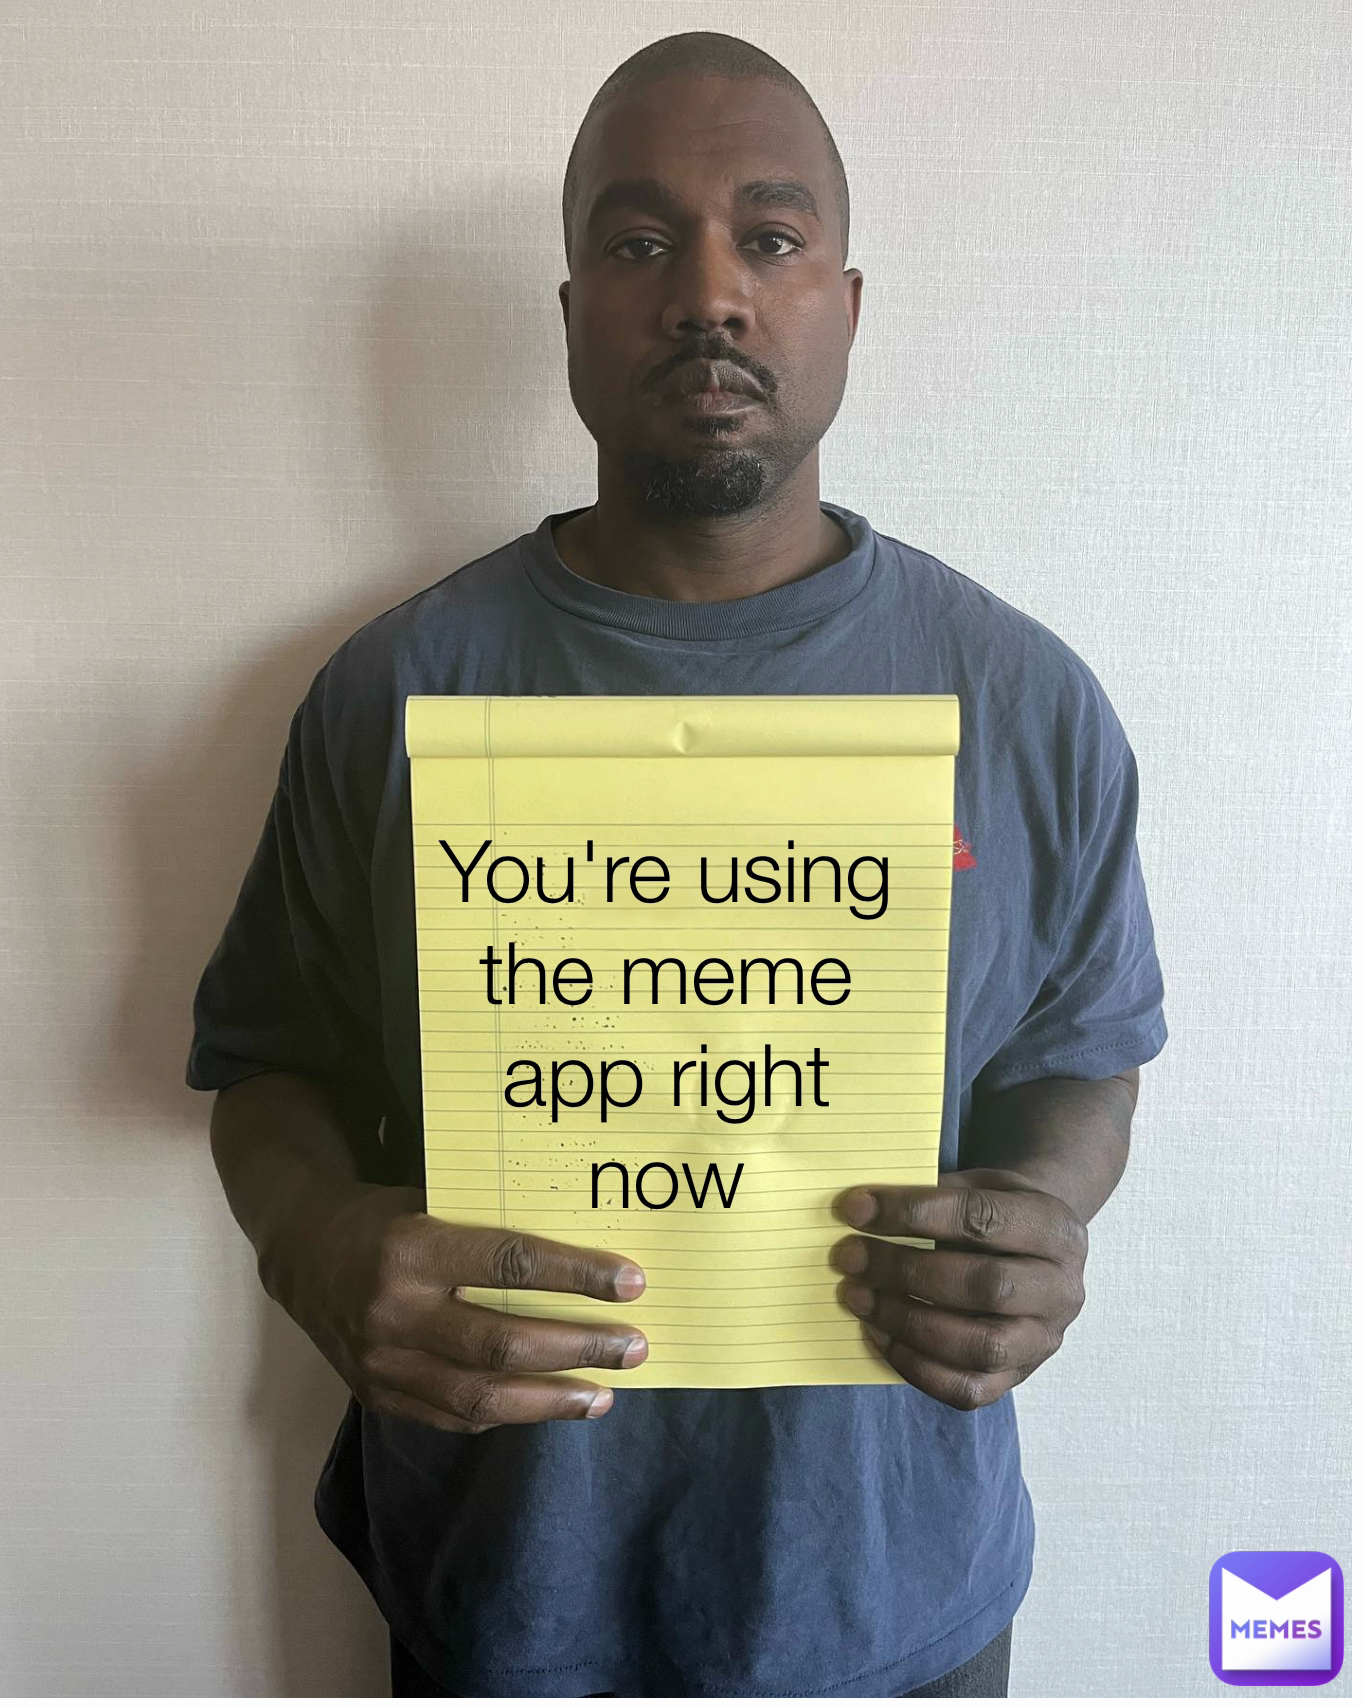 You're using the meme app right now